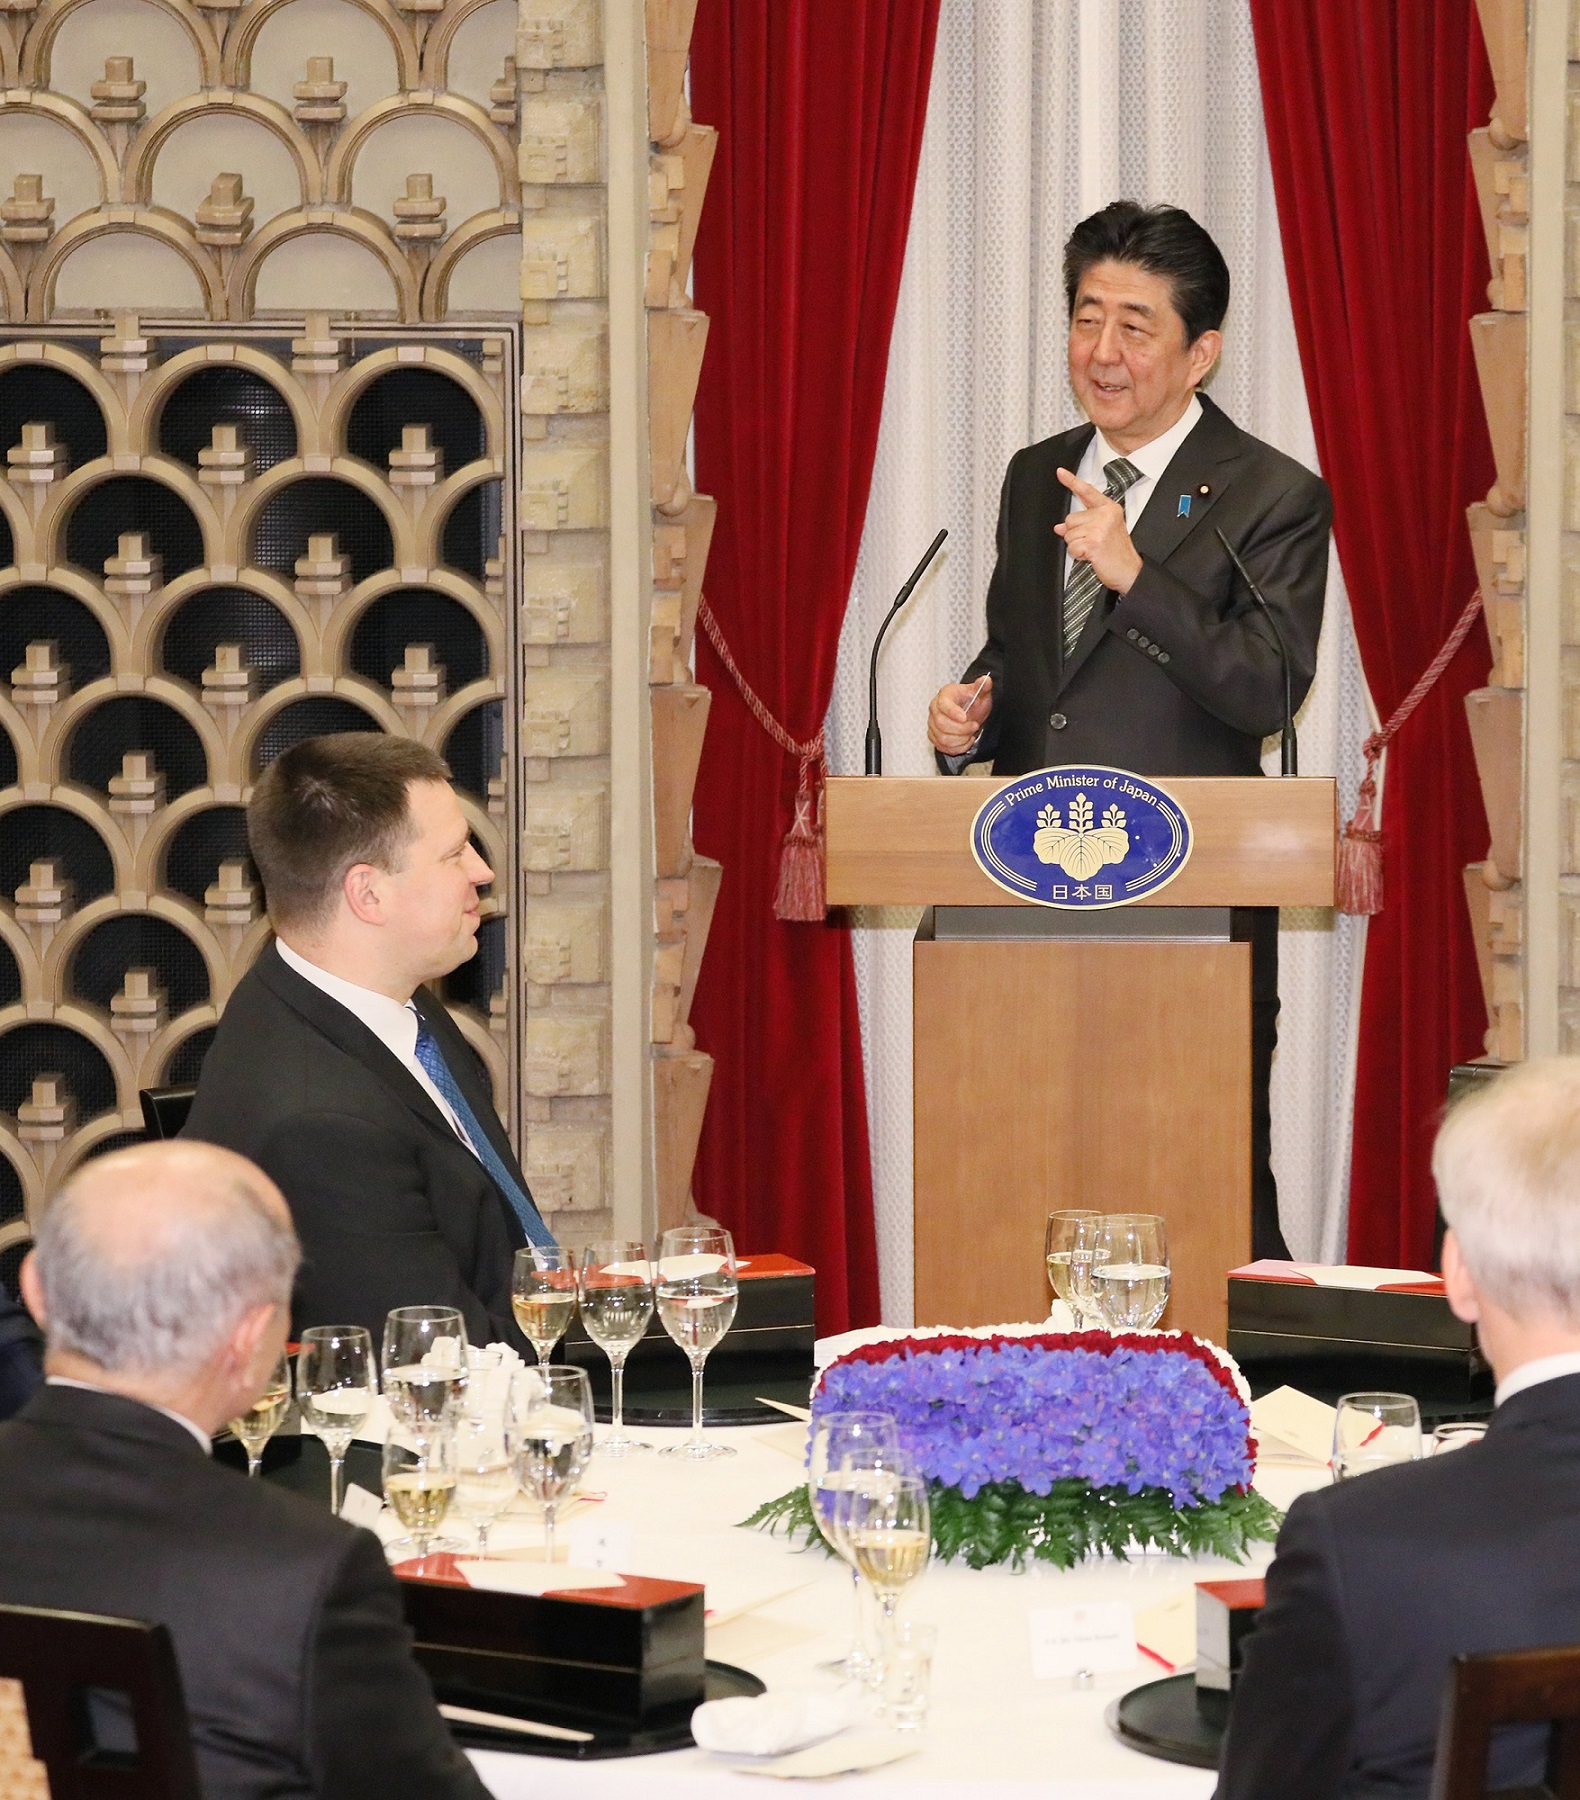 Photograph of the Prime Minister delivering an address at the banquet (3)